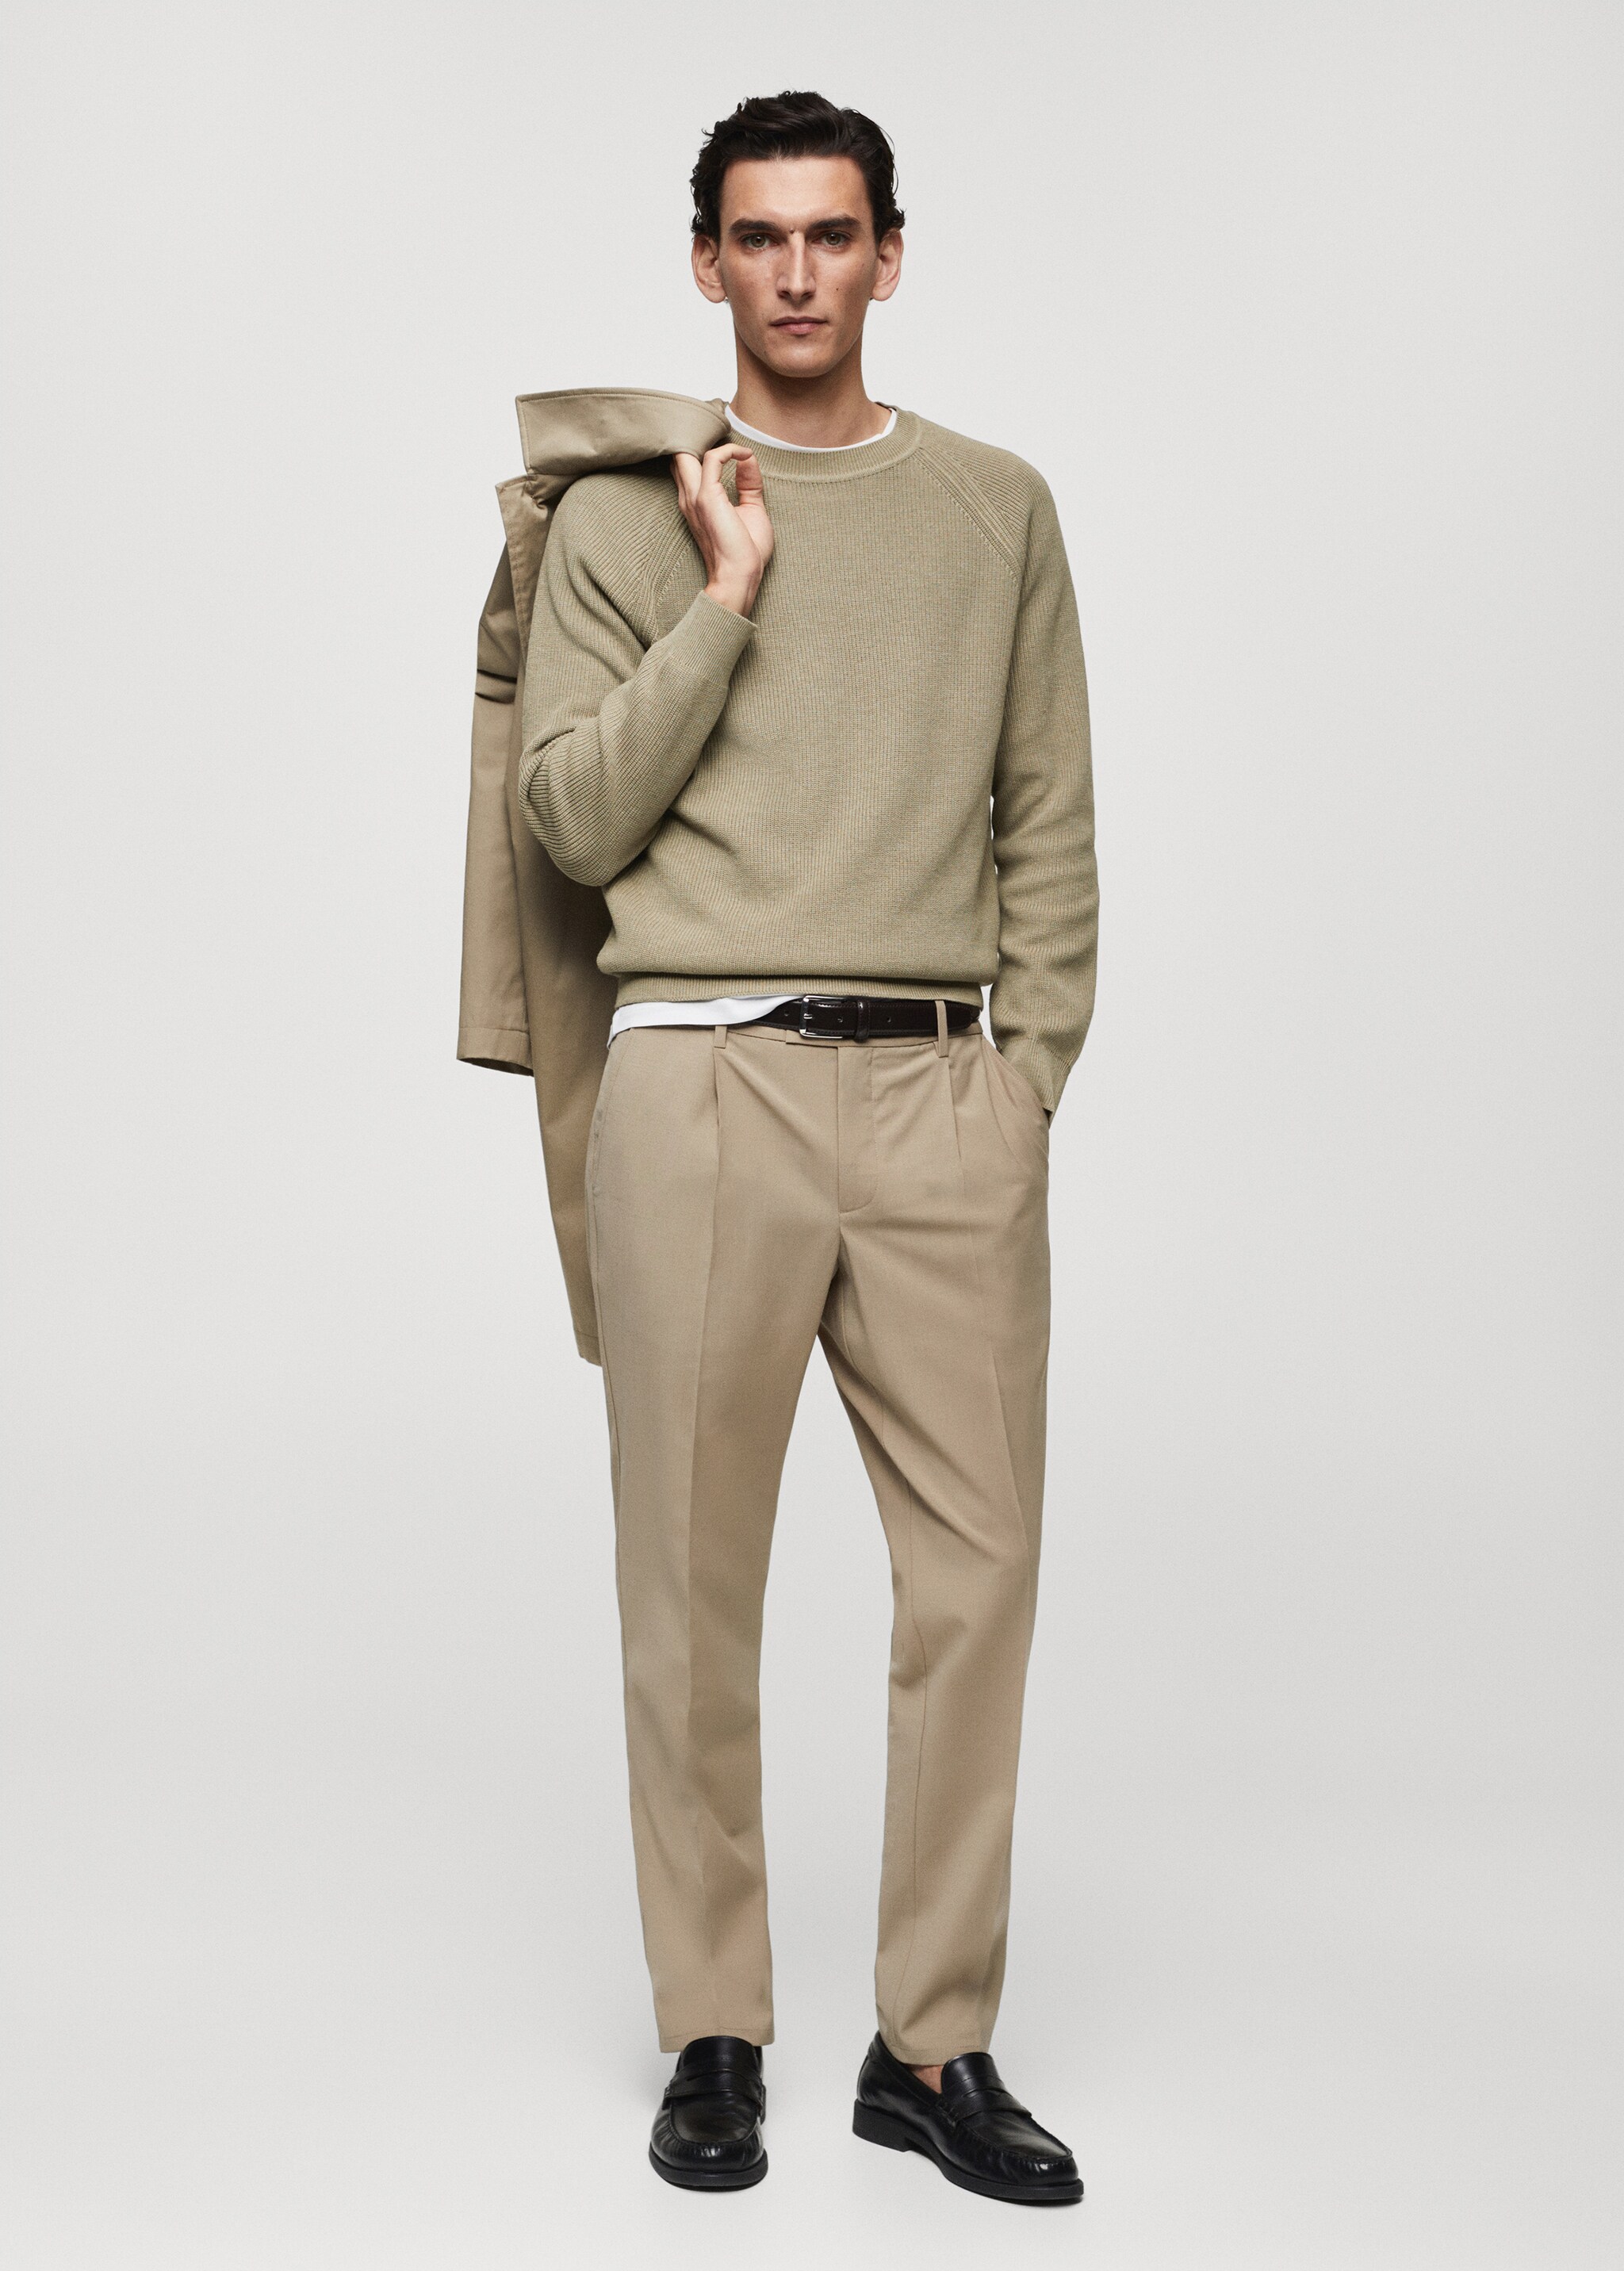 Cold wool trousers with pleat detail - General plane